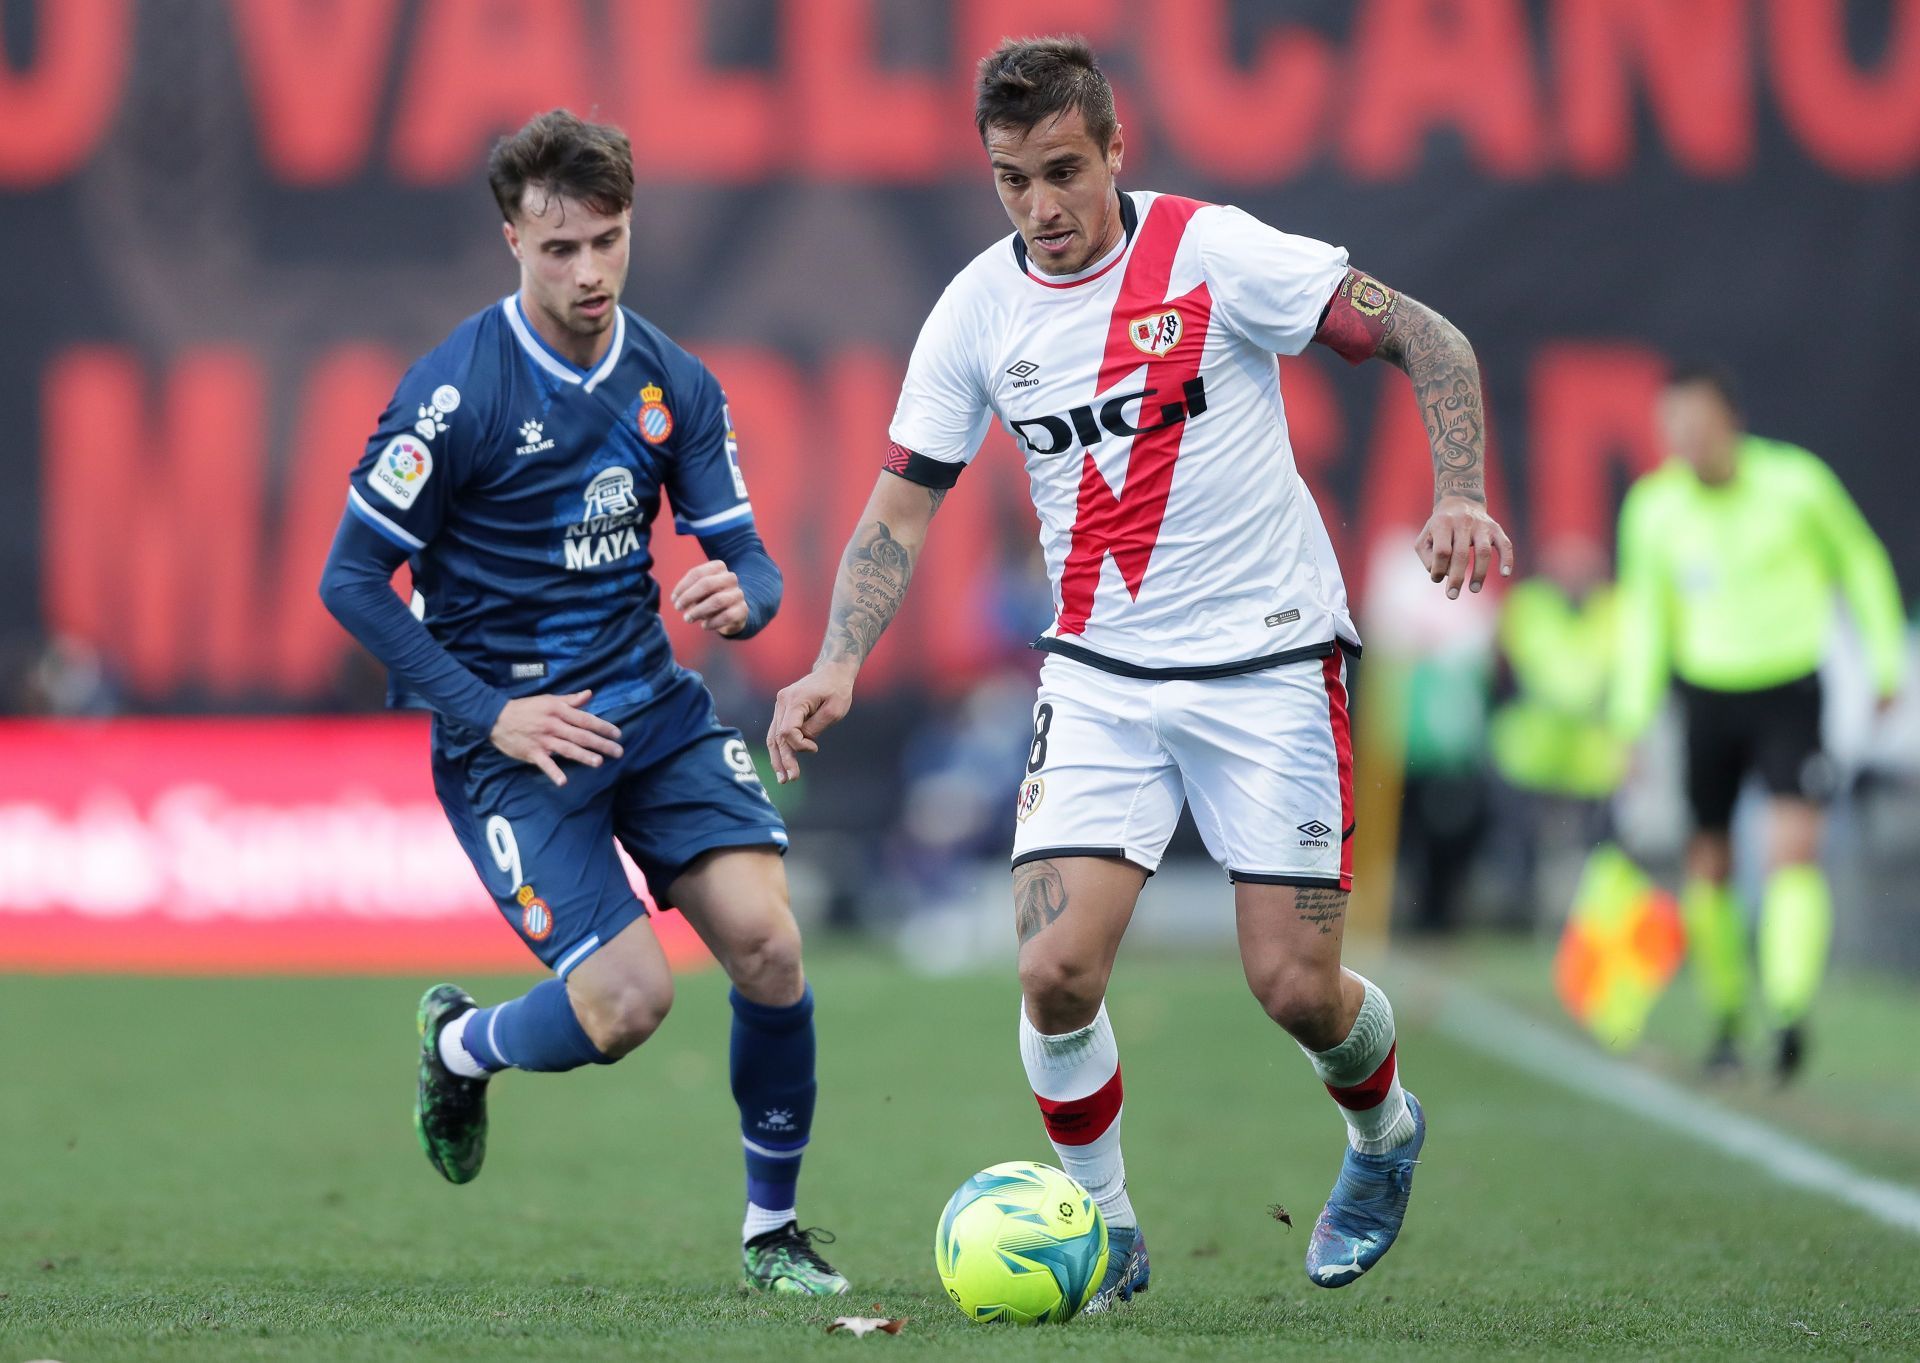 Espanyol and Rayo Vallecano will square off in a La Liga fixture on Thursday.